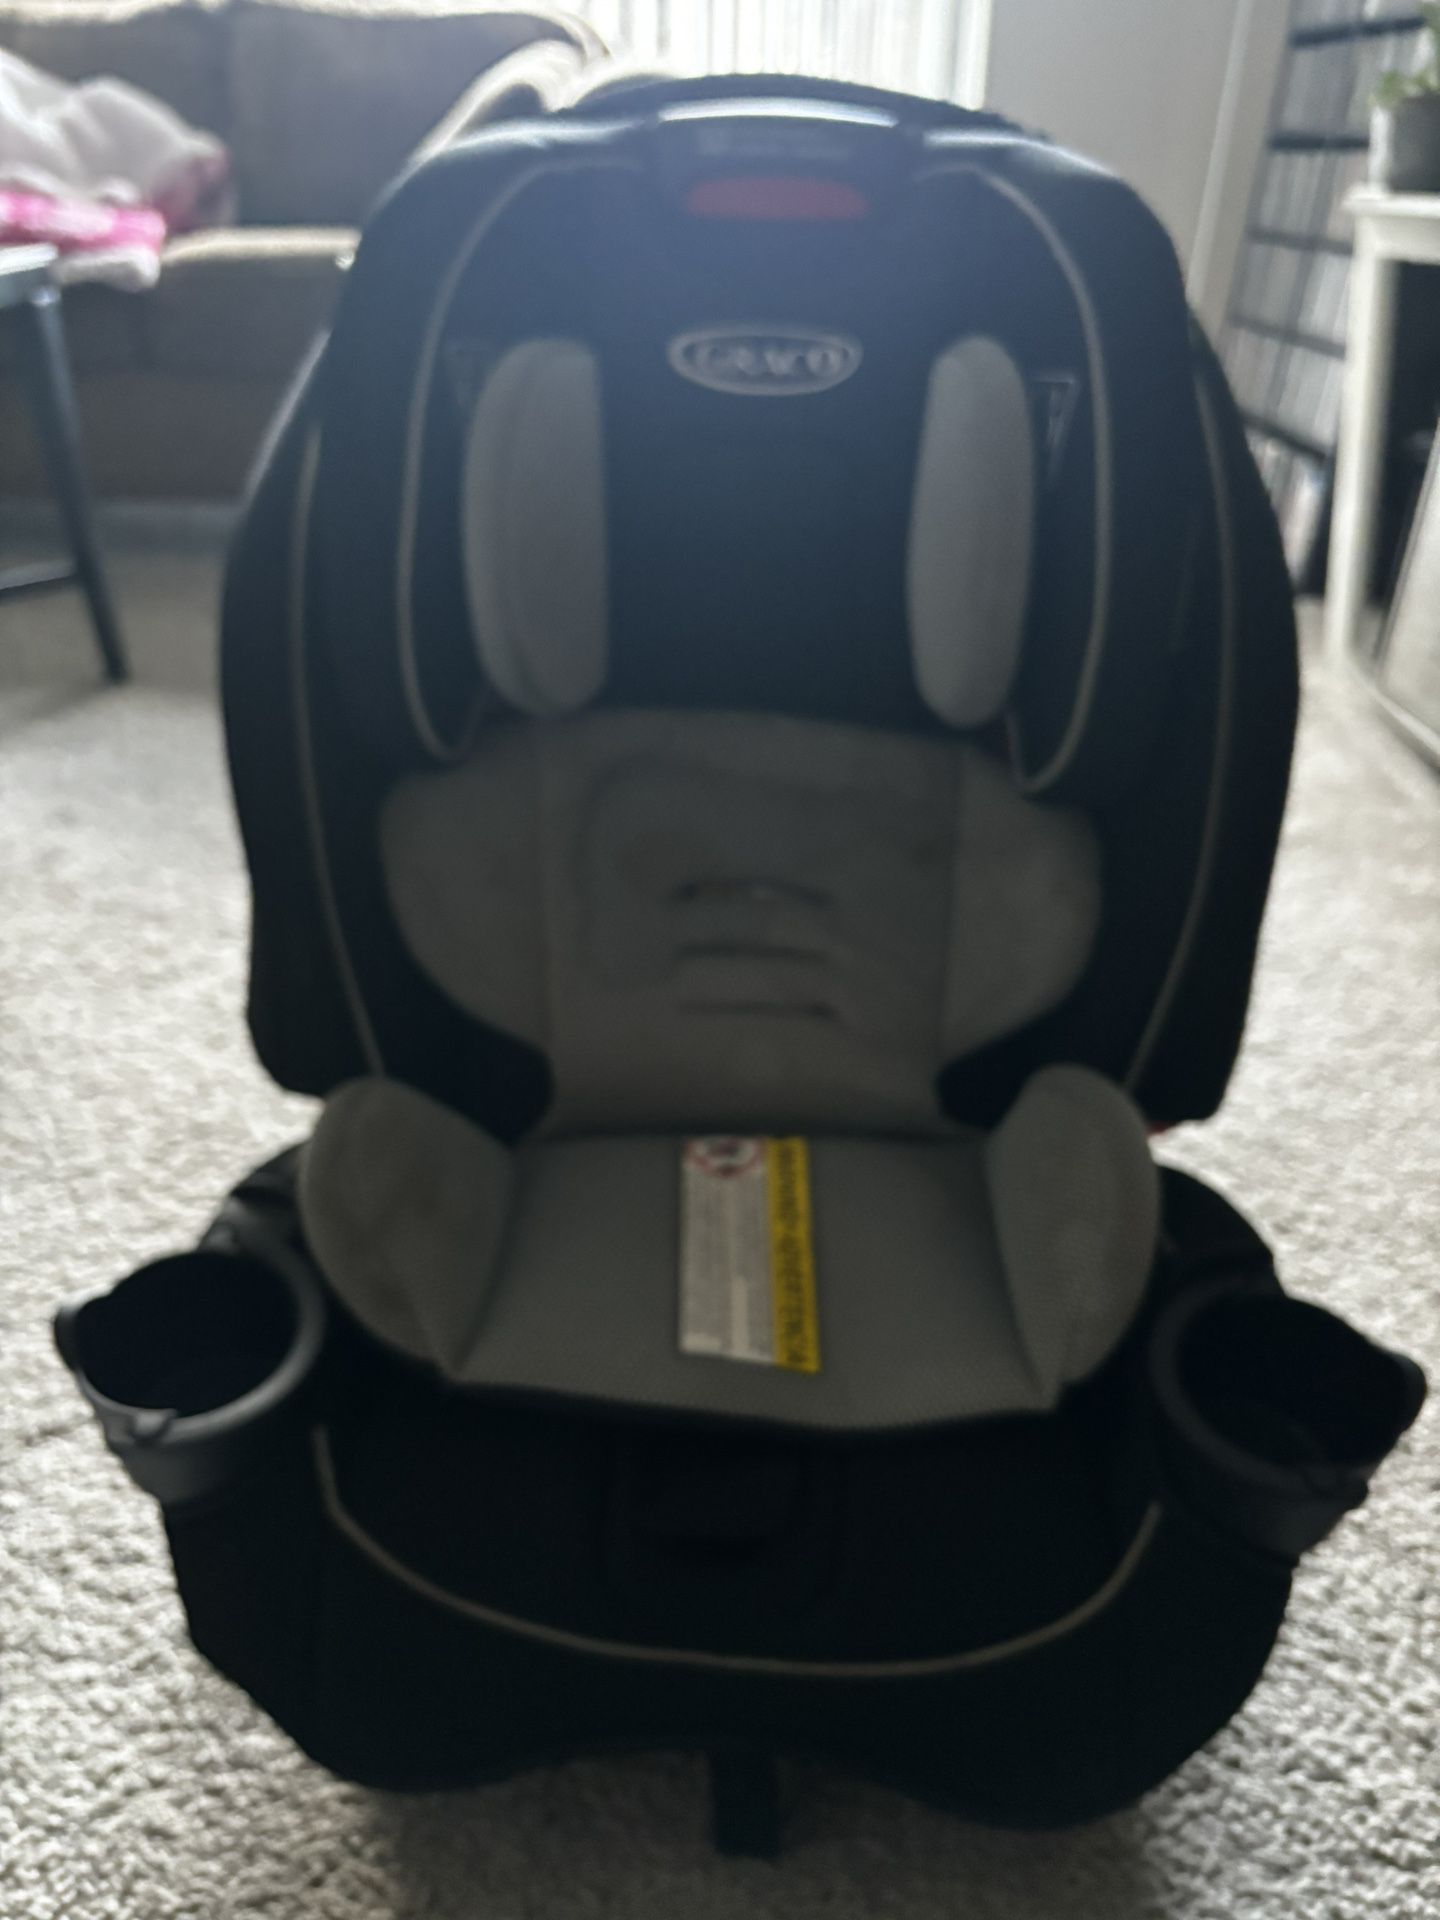 Graco SLIMFIT ALL-IN-ONE CAR SEAT